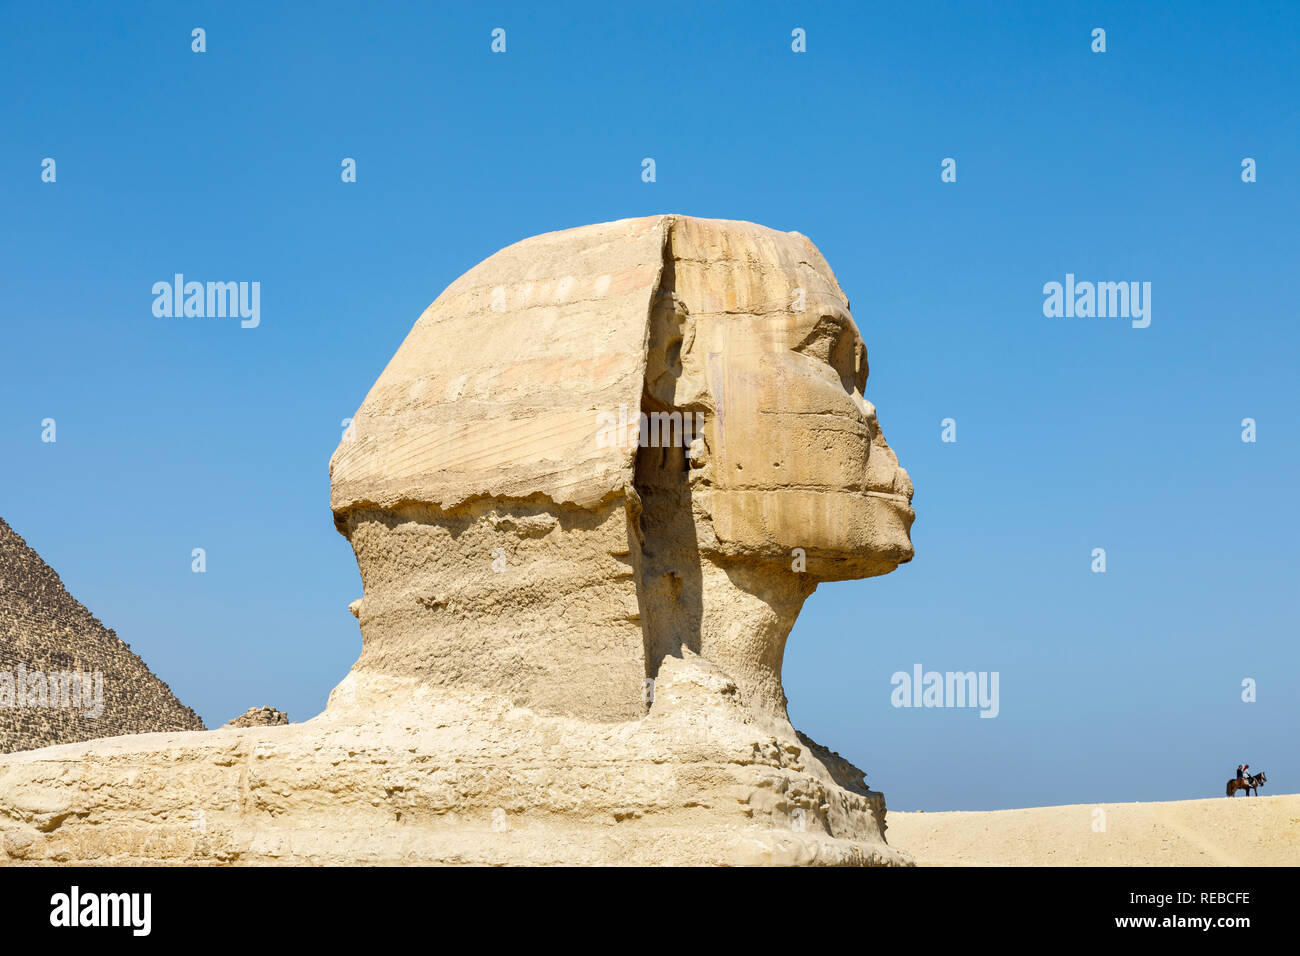 Side view of the large head of the iconic monumental sculpture, the Great Sphinx of Giza, Giza Plateau, Cairo, Egypt against a clear blue sky Stock Photo